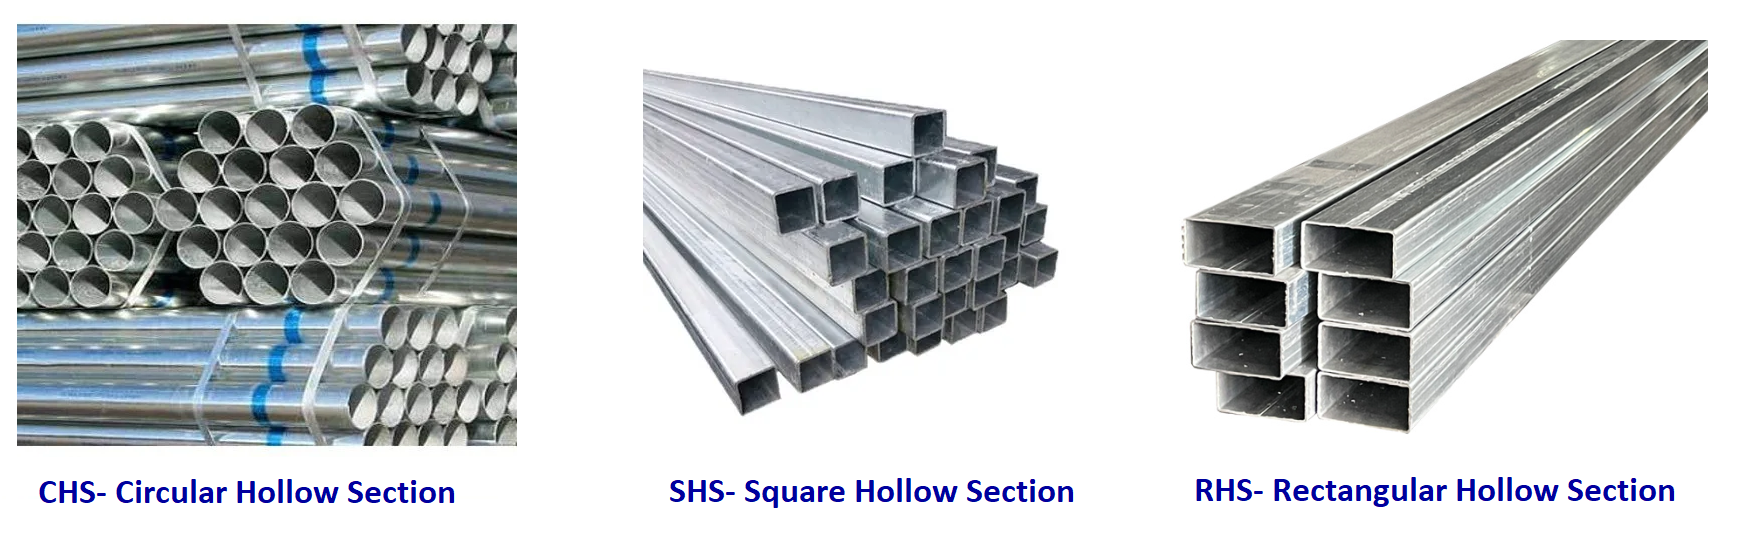 gi-pipe-gi-hollow-section-square-hollow-rectangular-hollow-section-manufacturer-in-india